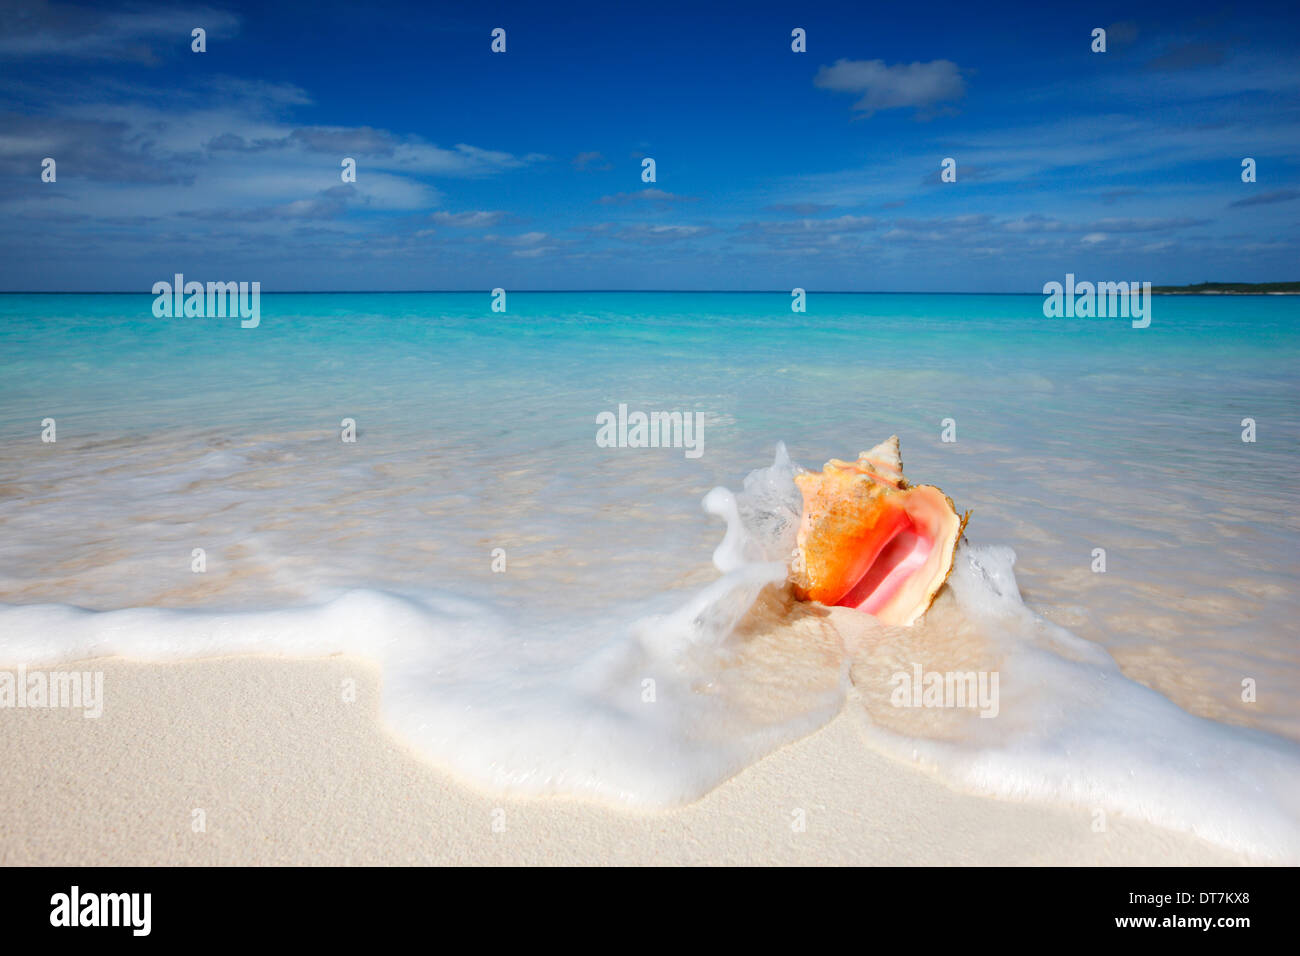 Caribbean sand beach with queen conch shell. Stock Photo